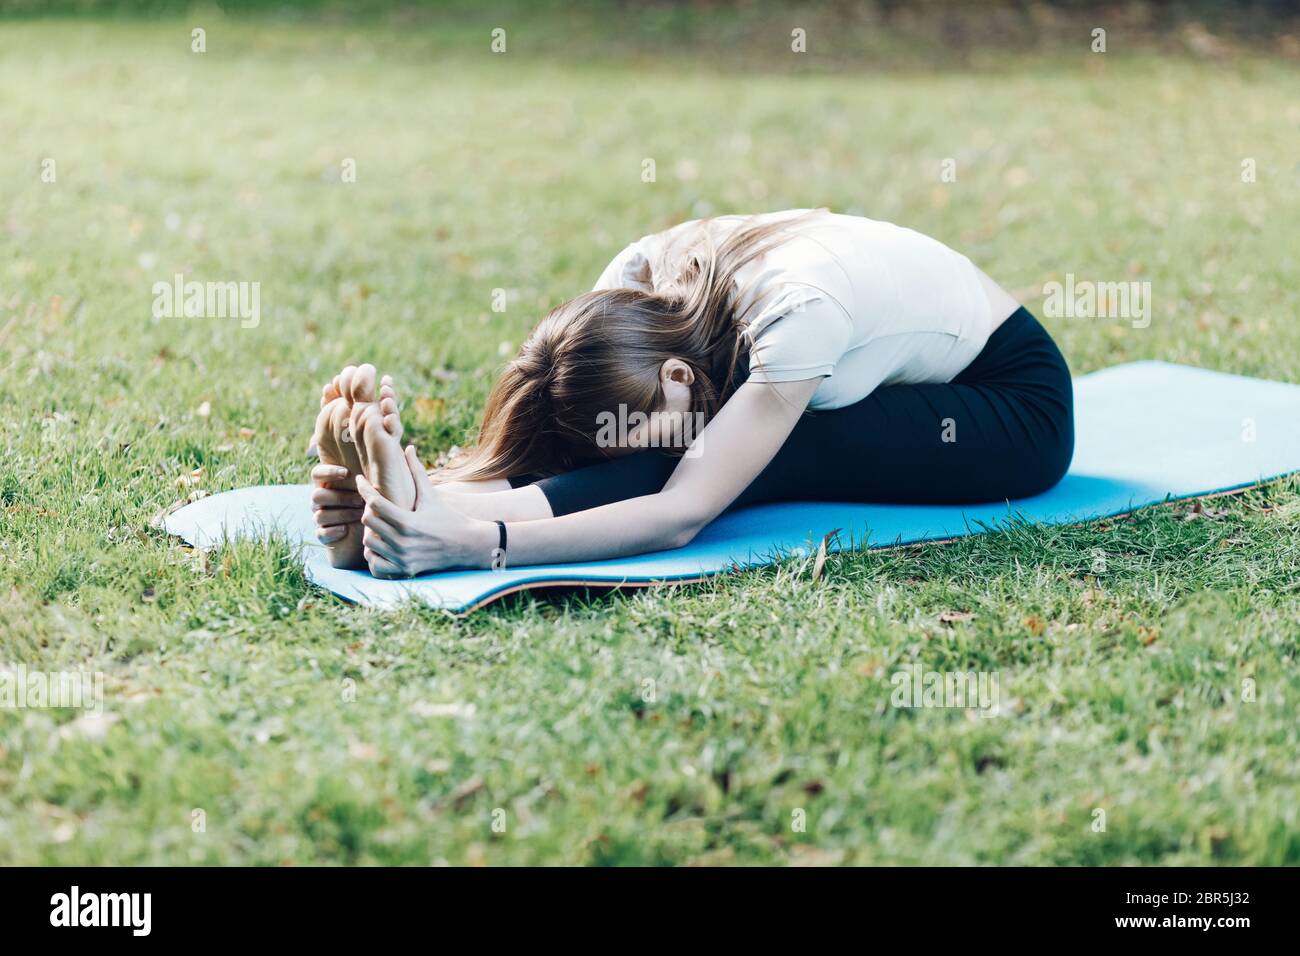 flexible sporty woman doing stretching yoga in park Stock Photo